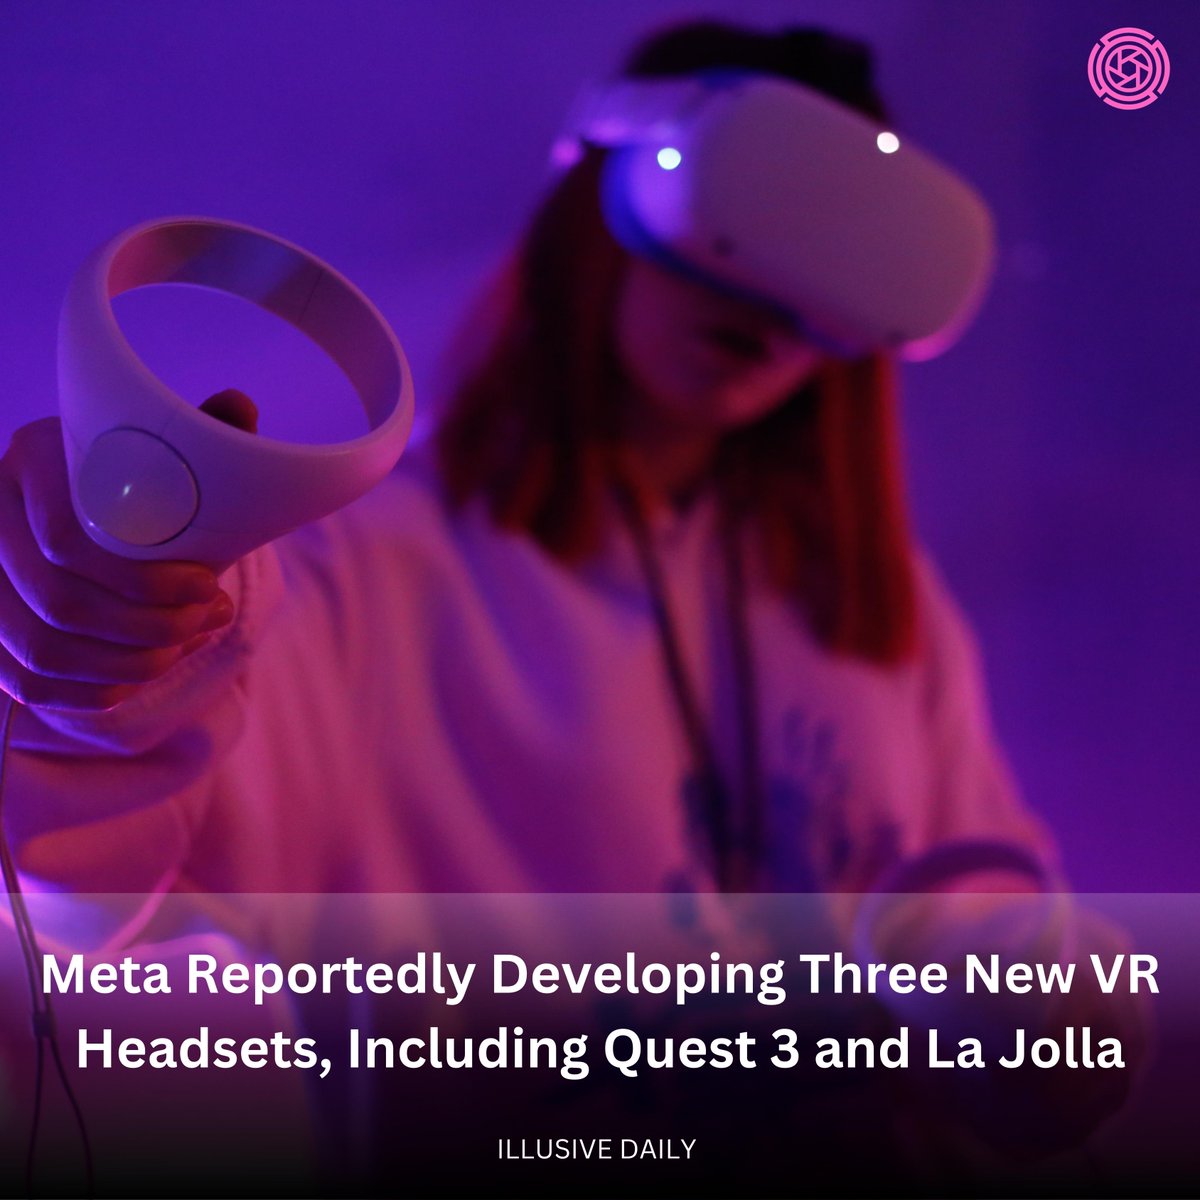 According to a recent report by The Verge, Meta, formerly known as Facebook,
Discover more on our website through the link in our bio.

#illusivedaily #news #trends #MetaVR #Quest3 #LaJolla #VirtualReality #VRheadsets #MixedReality #AugmentedReality  #TechNews #FutureTech